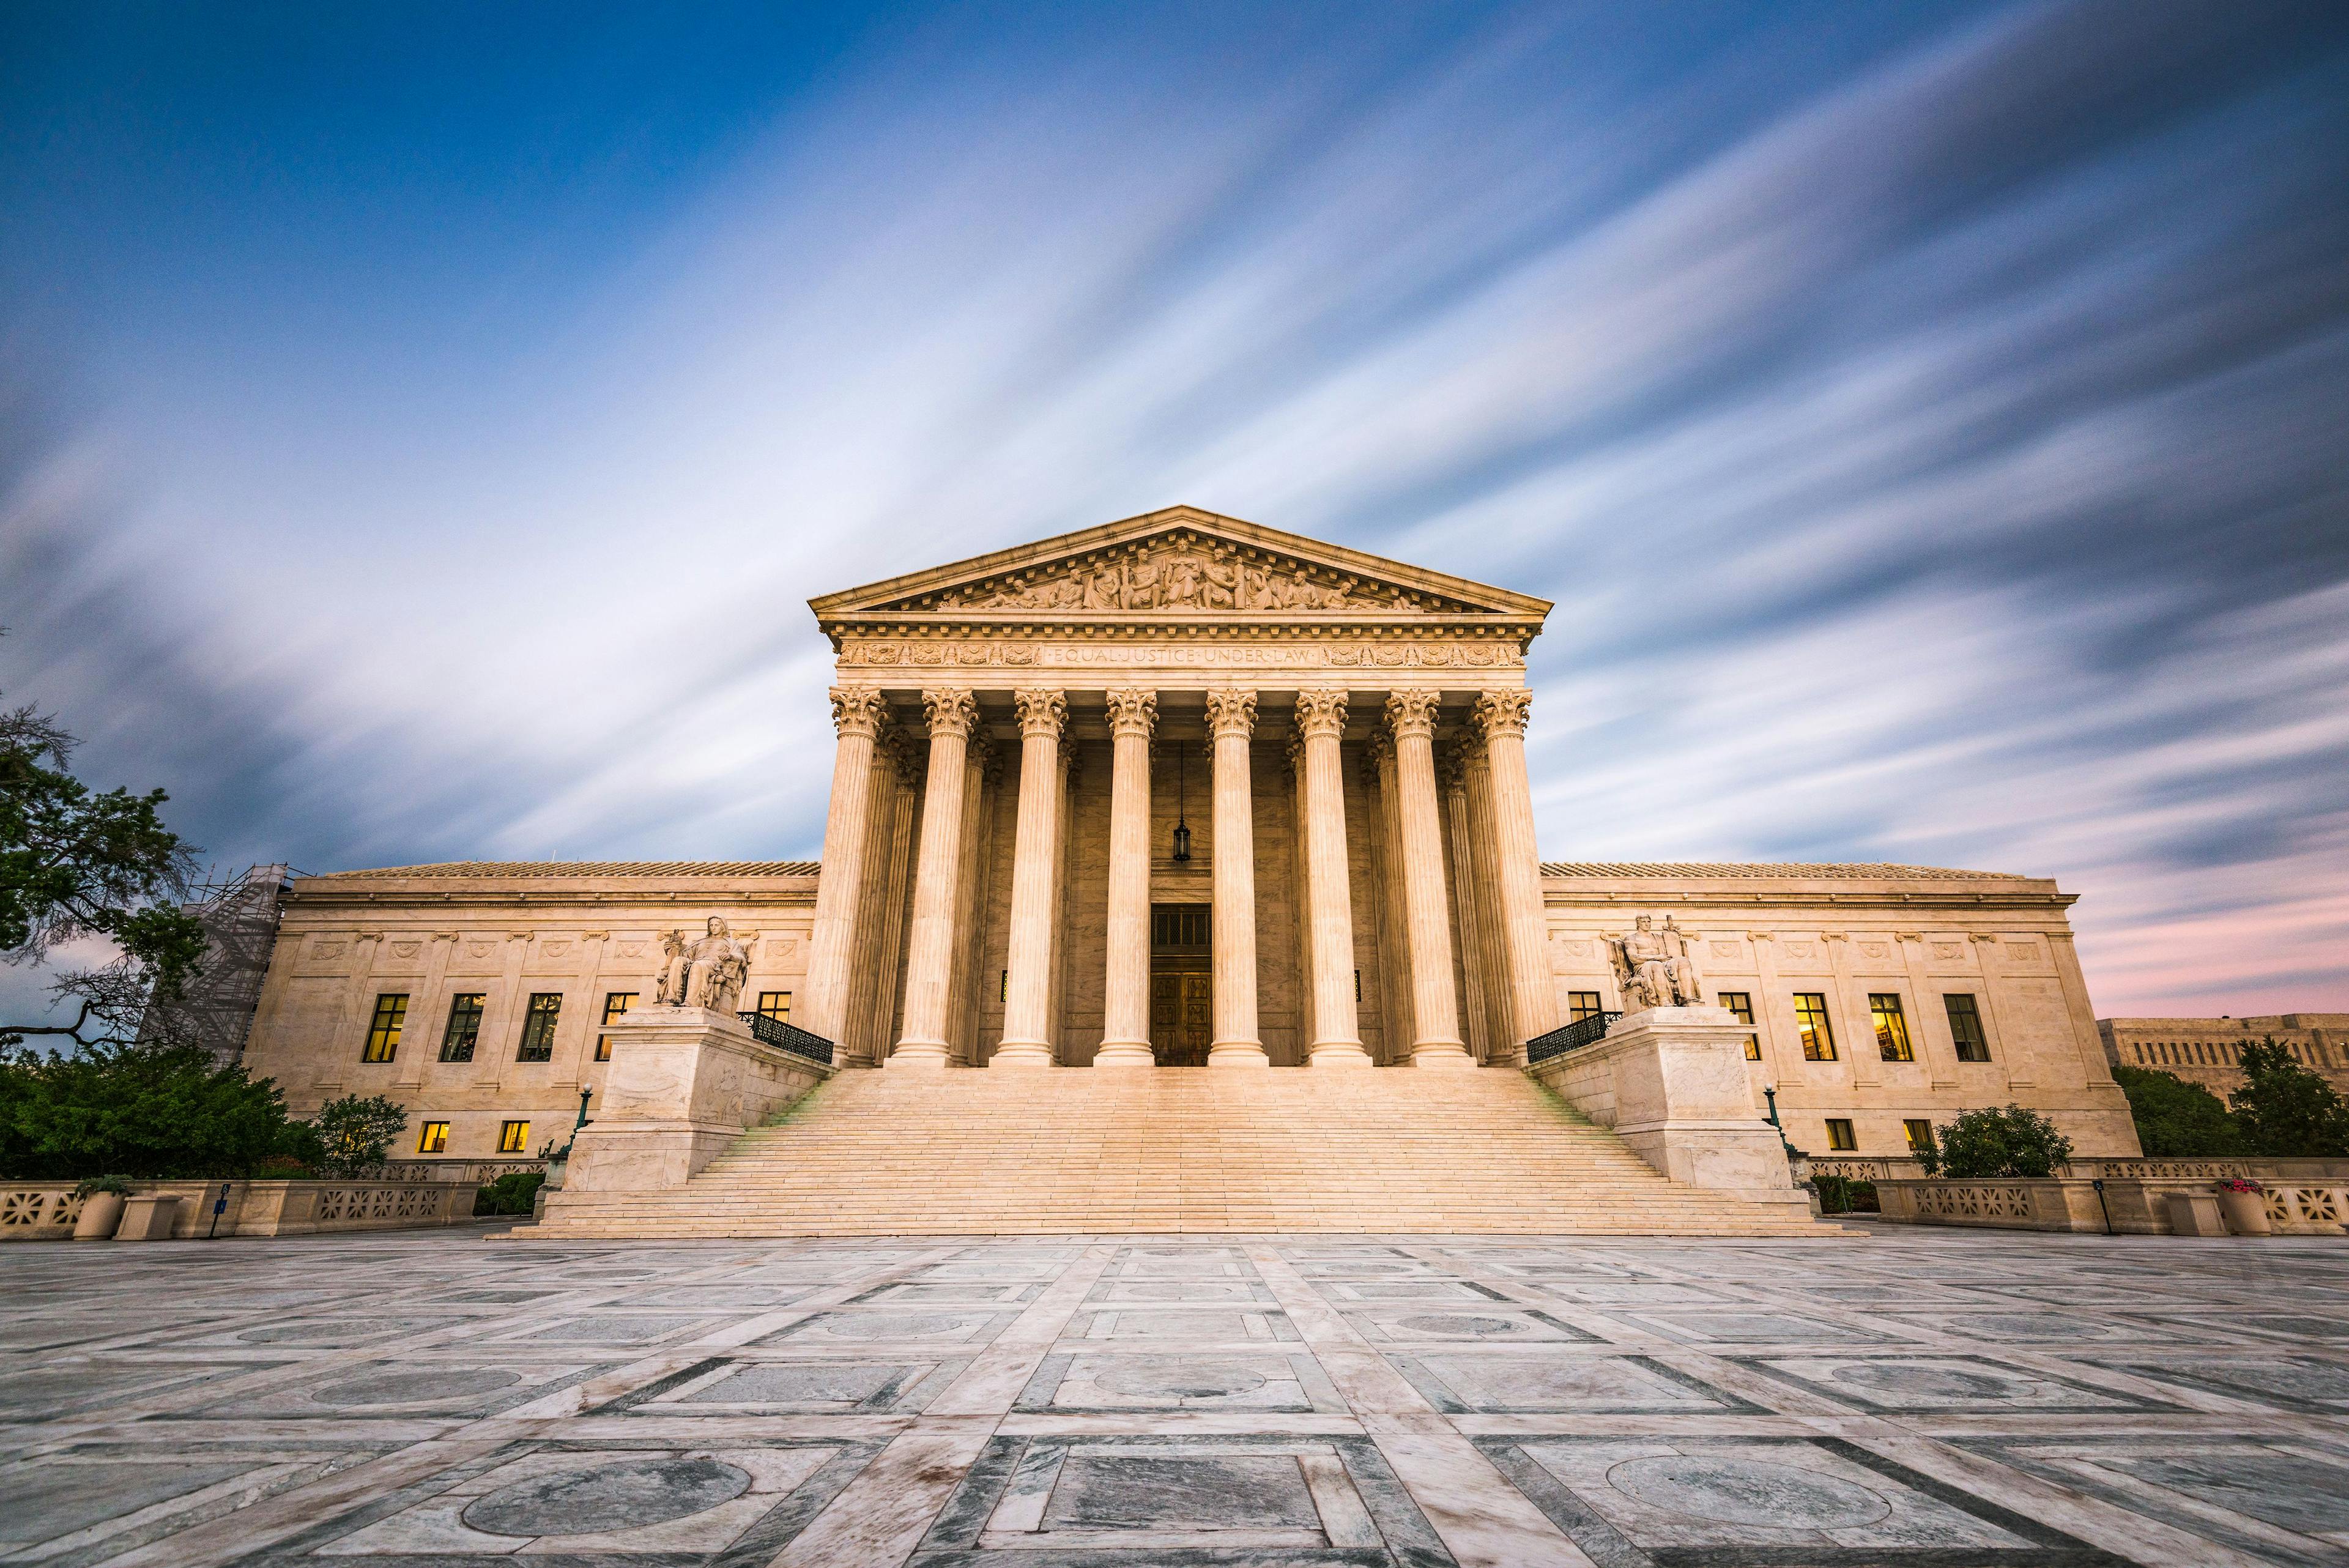 In June 2022, the Supreme Court unanimously ruled in the case of American Hospital Association v Becerra that HHS’ decision to reduce Medicare payments to 340B hospitals was unlawful.

Credit: SeanPavonePhoto - stock.adobe.com